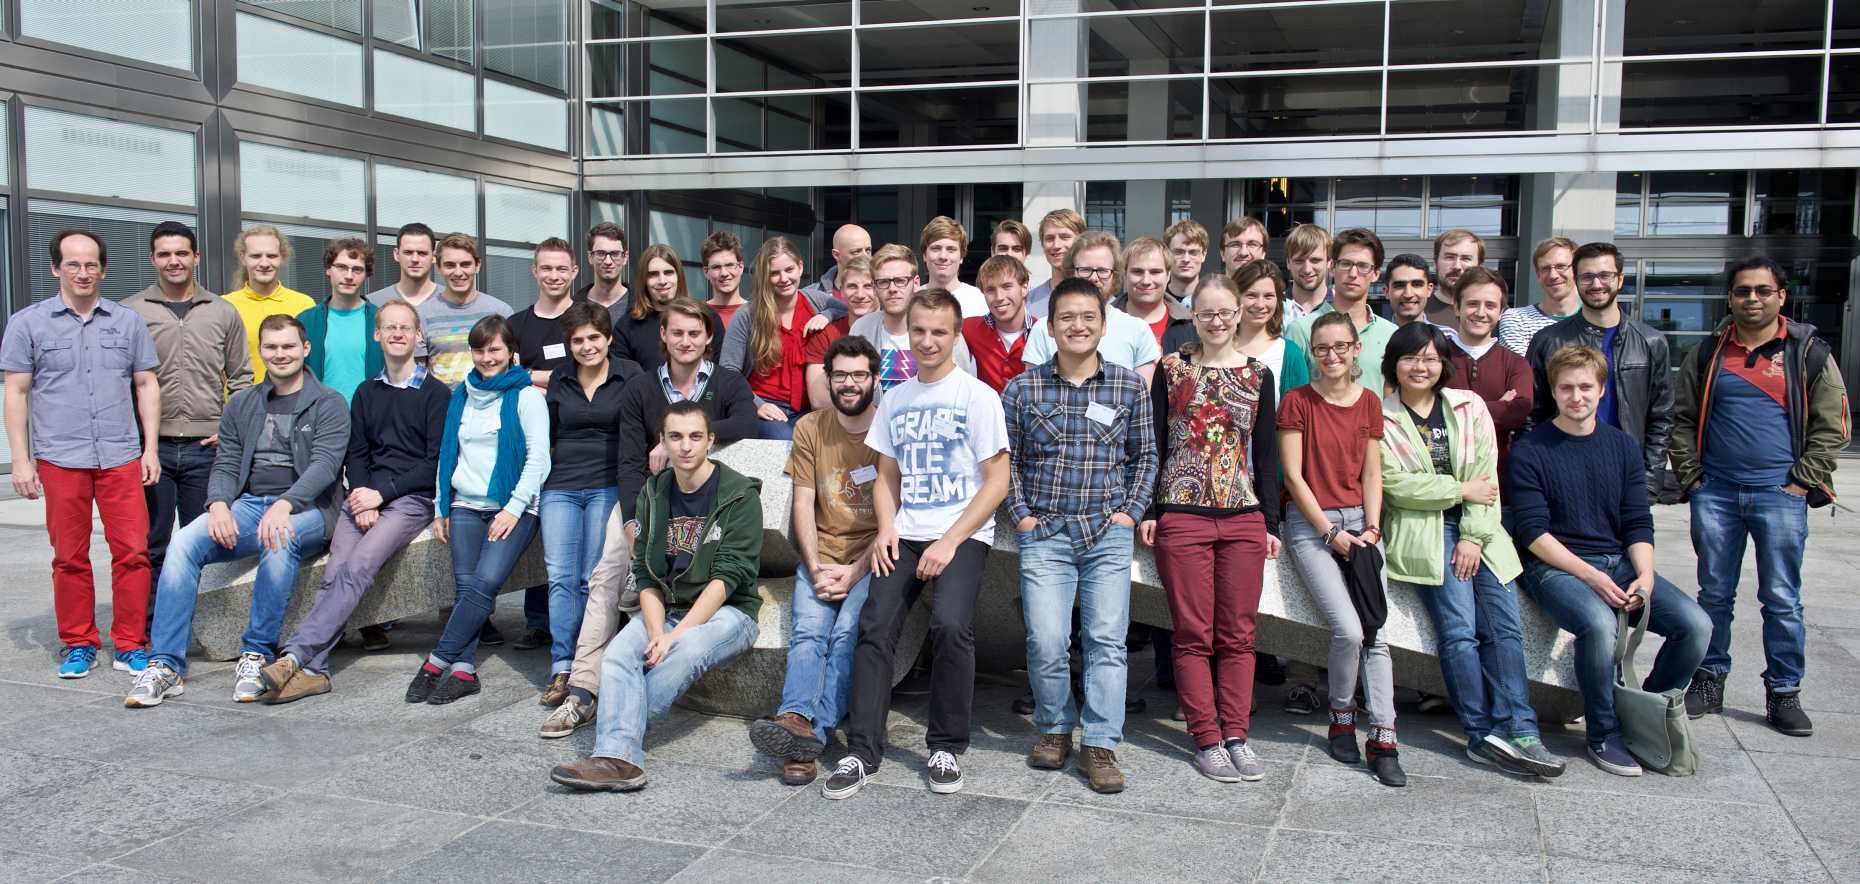 Enlarged view: Group picture of the IDEA League School on Quantum Information Processing at ETH Zurich, September 9, 2015. Photo: ETH Zurich/D-PHYS Heidi Hostettler.